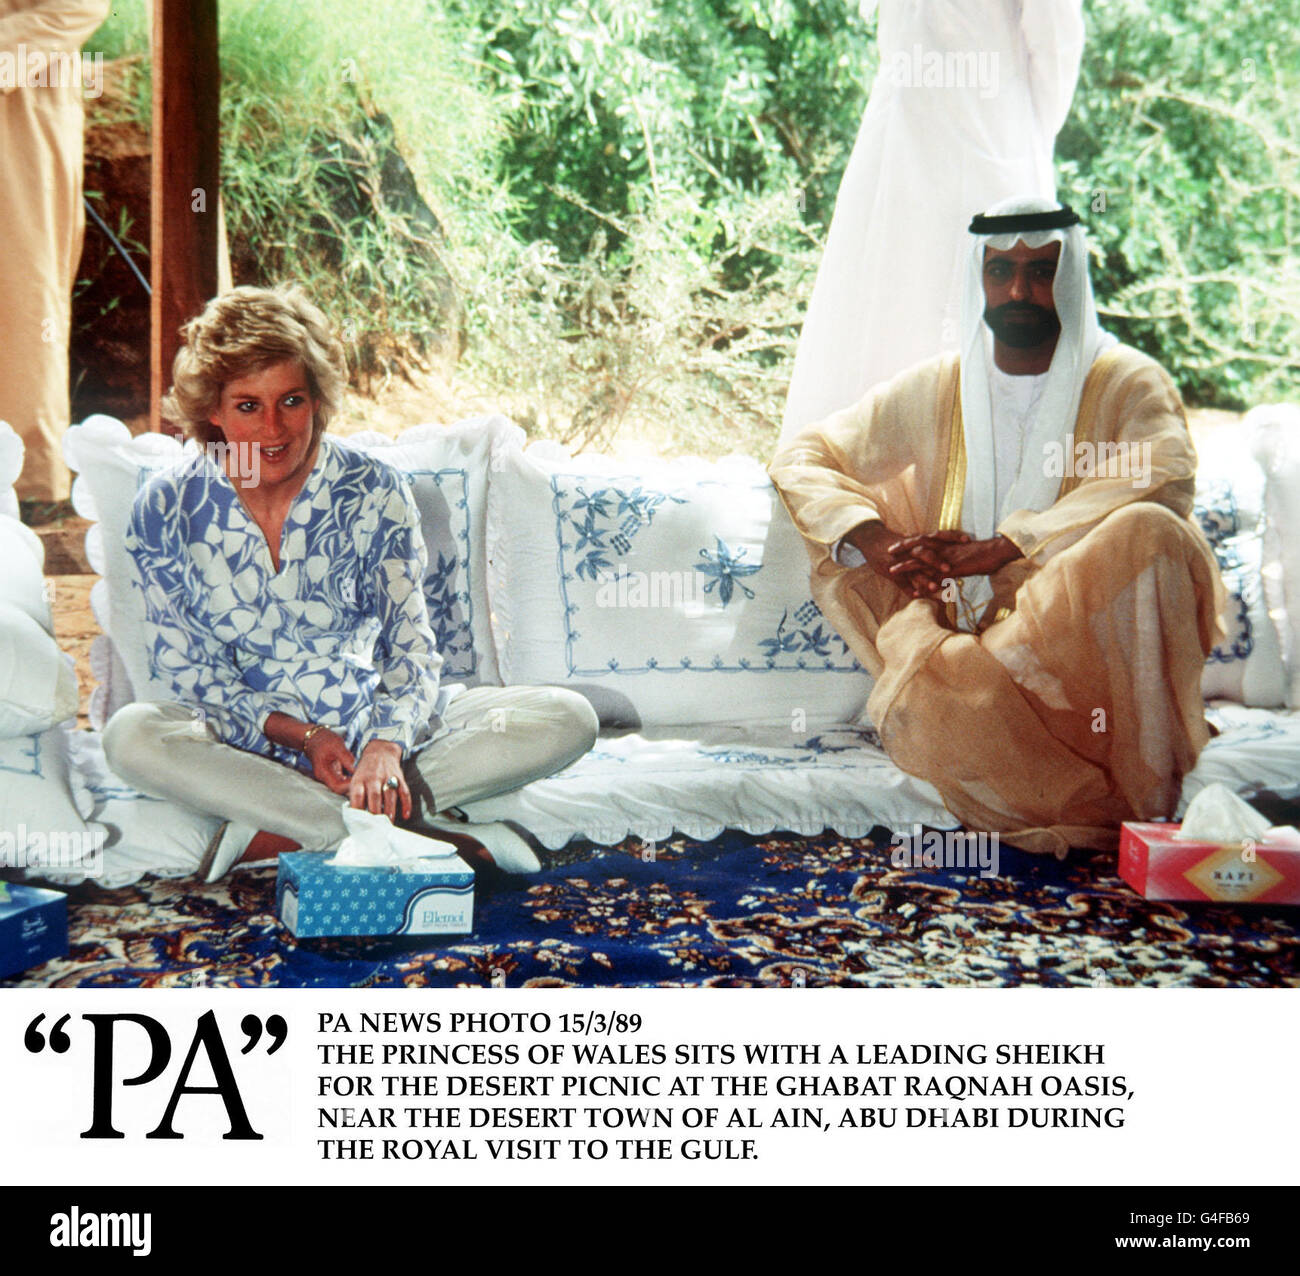 PA NEWS PHOTO 15/3/89 THE PRINCESS OF WALES SITS WITH A LEADING SHEIKH FOR THE DESERT PICNIC AT THE GHABAT RAQNAH OASIS, NEAR THE DESERT TOWN OF AL AIN, ABU DHABI DURING THE ROYAL VISIT TO THE GULF Stock Photo